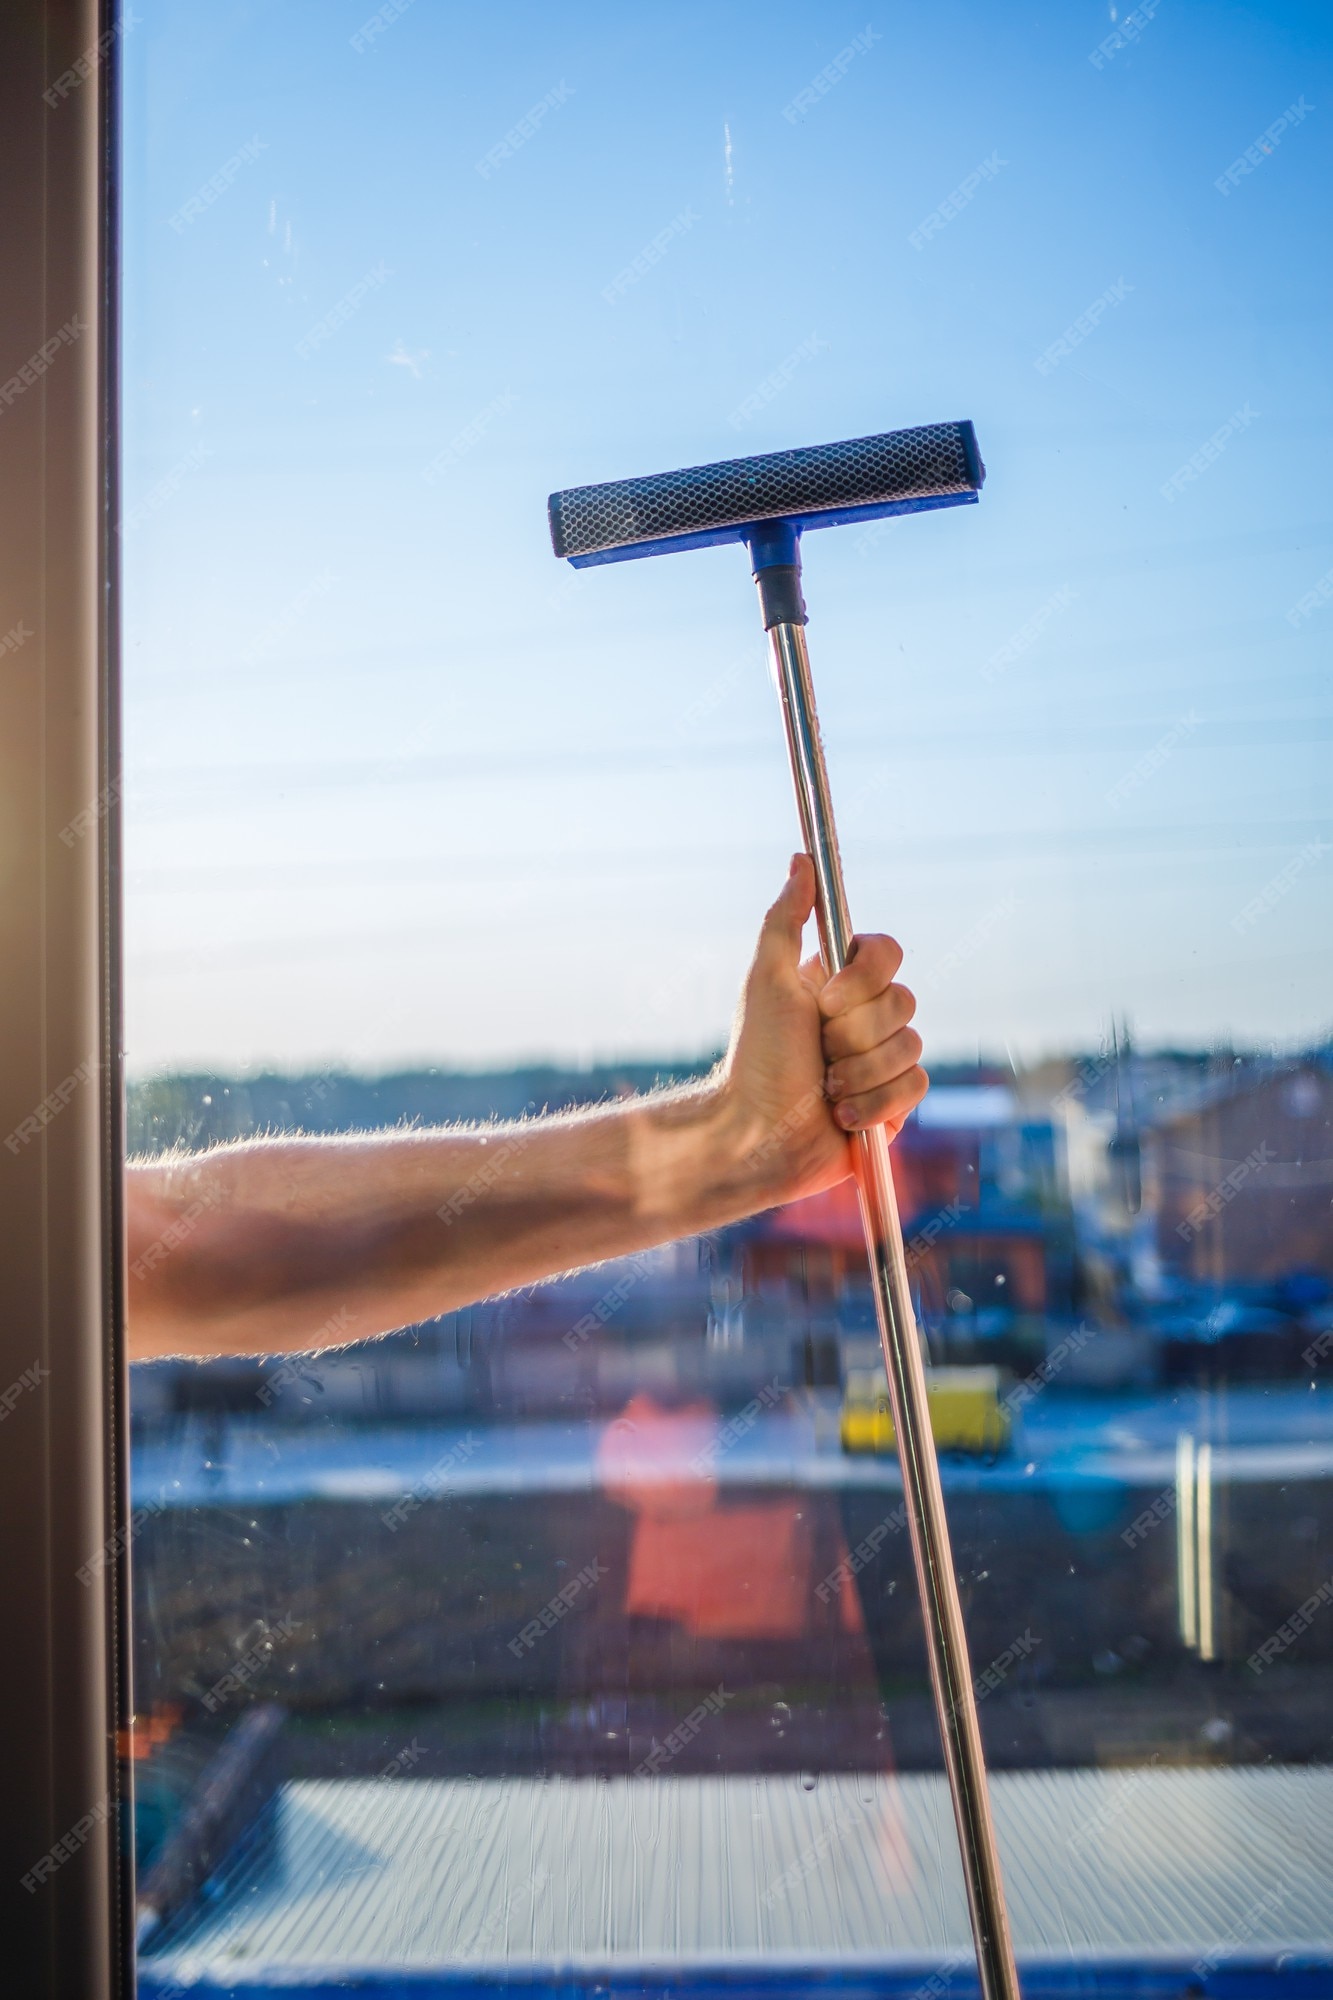 https://img.freepik.com/premium-photo/window-cleaning-high-rise-buildings-houses-with-brush-window-cleaning-brush-large-window-multi-storey-building-cleaning-service-dust-removal-glass-washing_173815-15360.jpg?w=2000